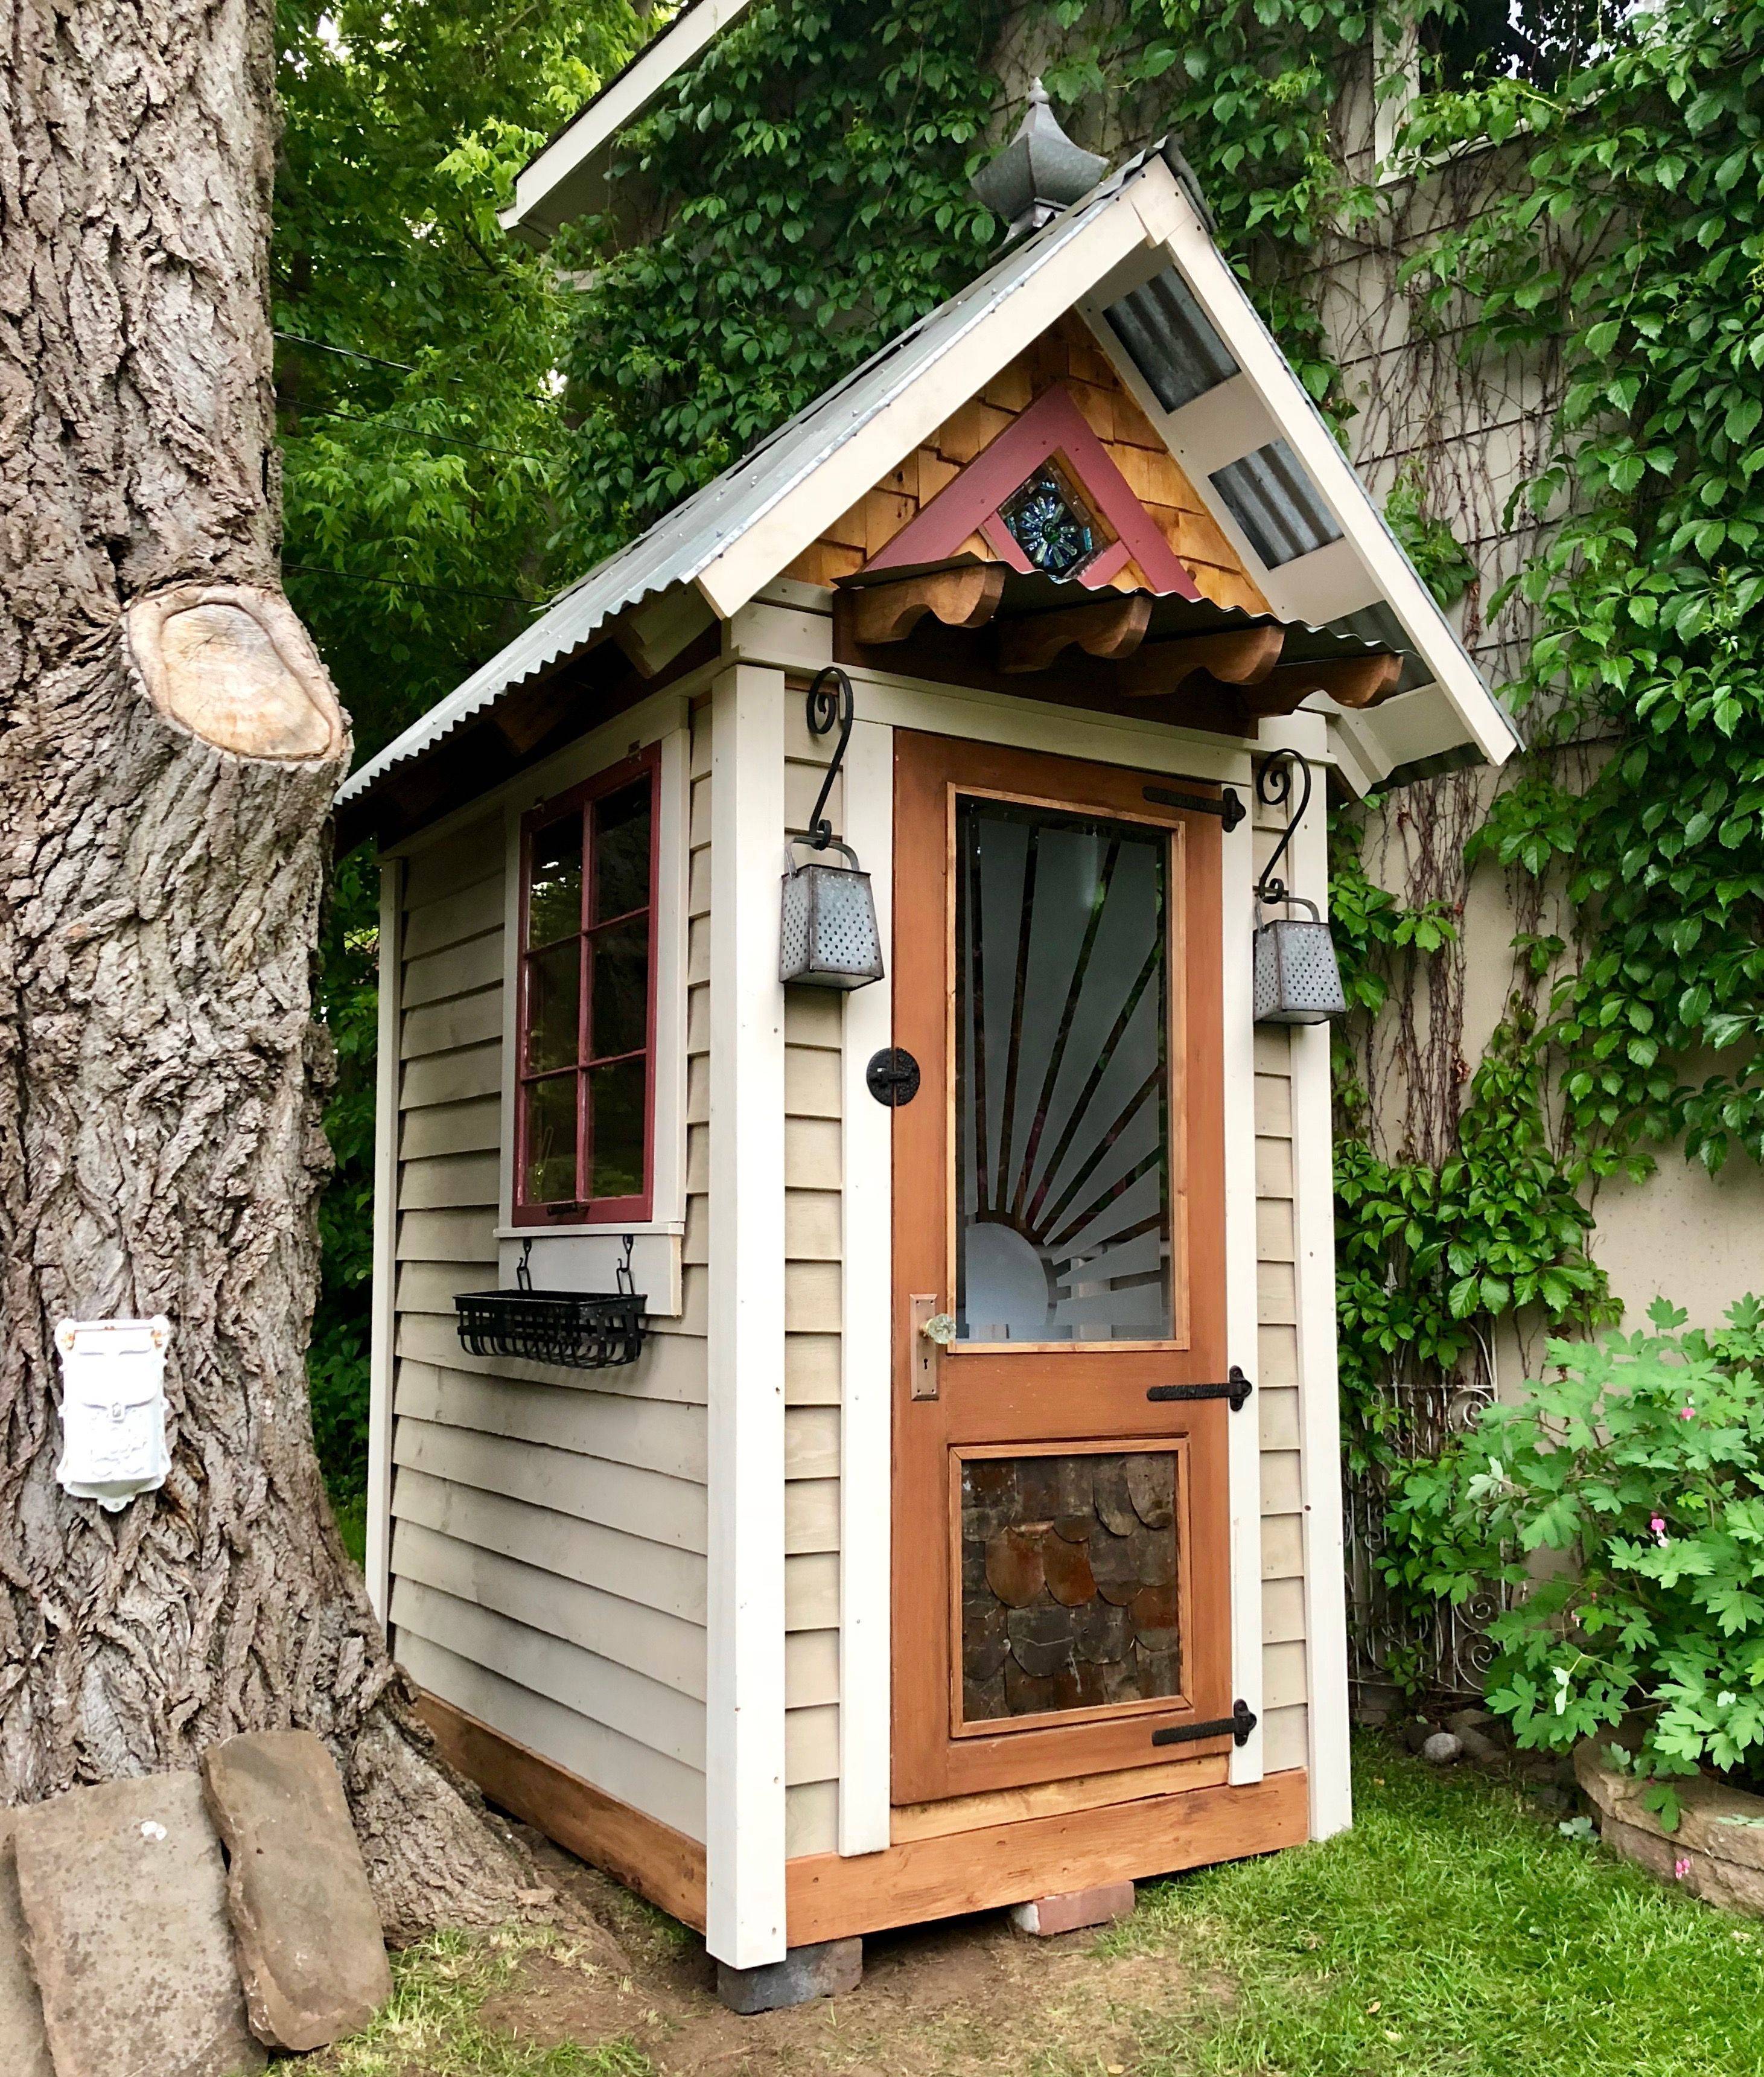 Lovely And Cute Garden Shed Design Ideas